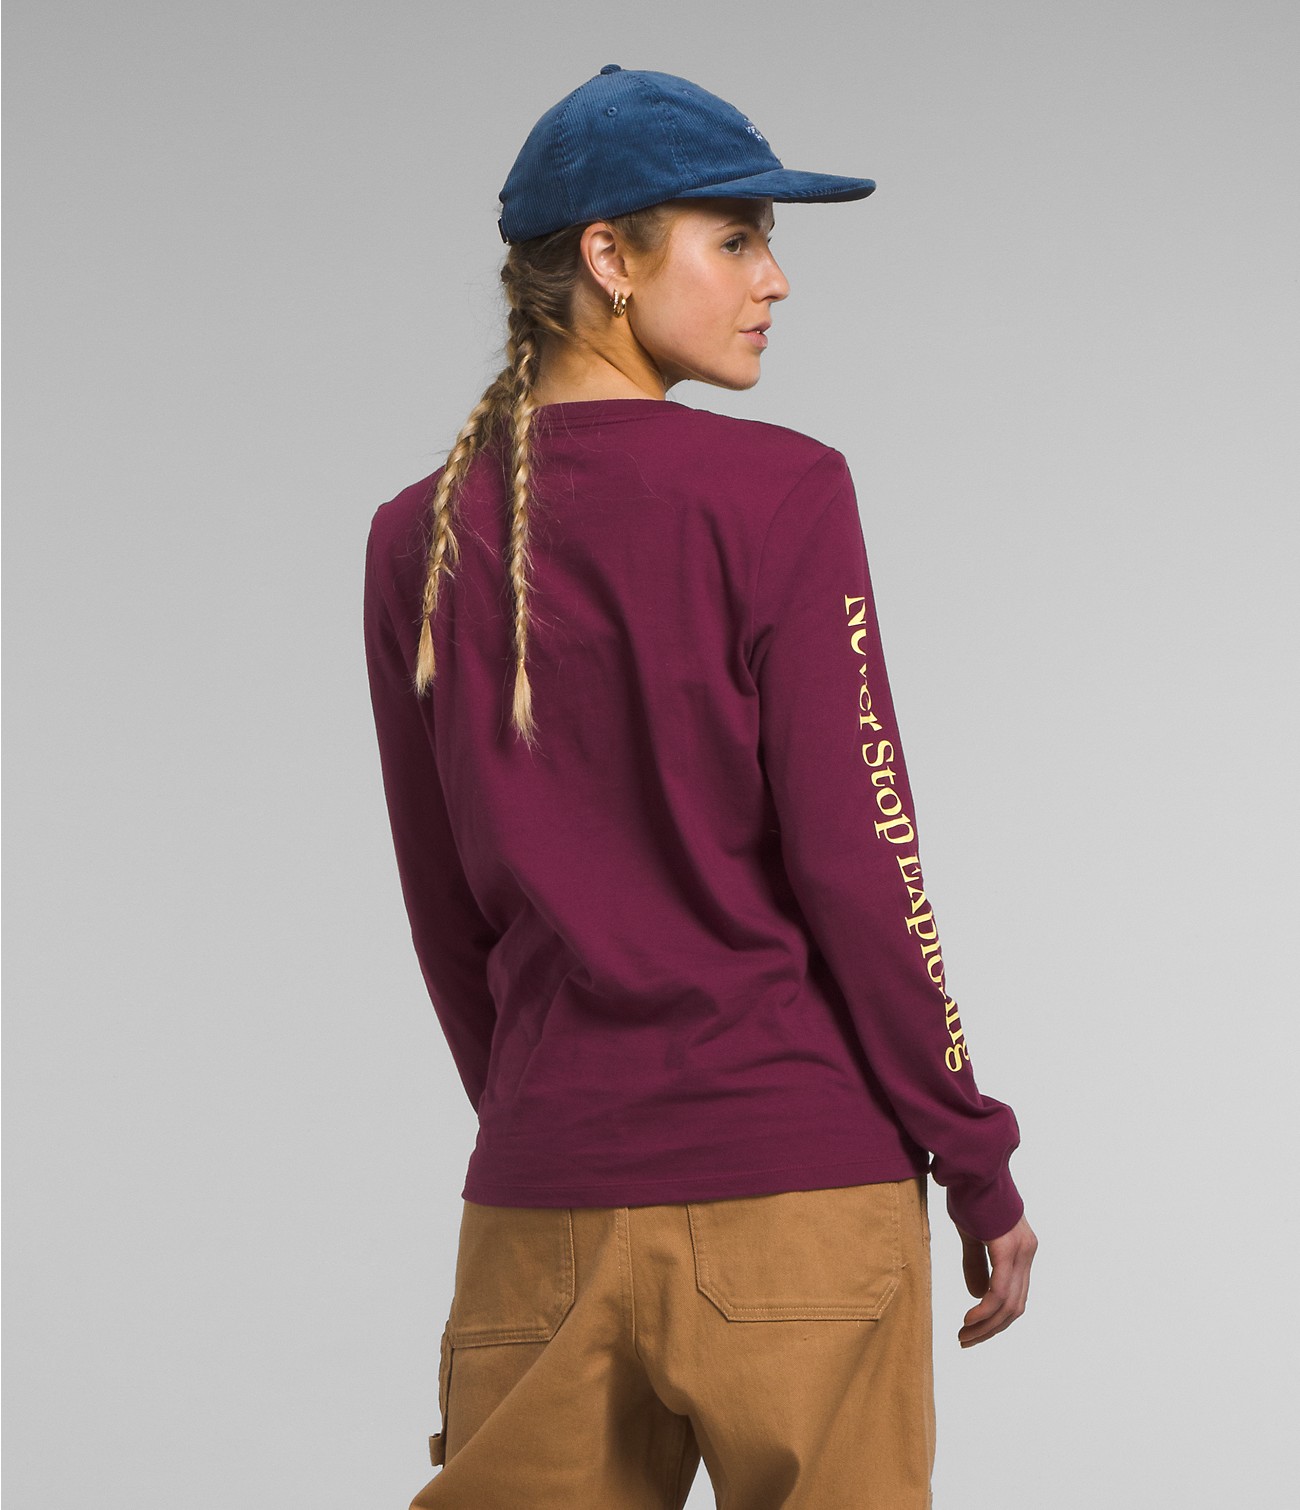 Women’s Long-Sleeve Places We Love Tee | The North Face